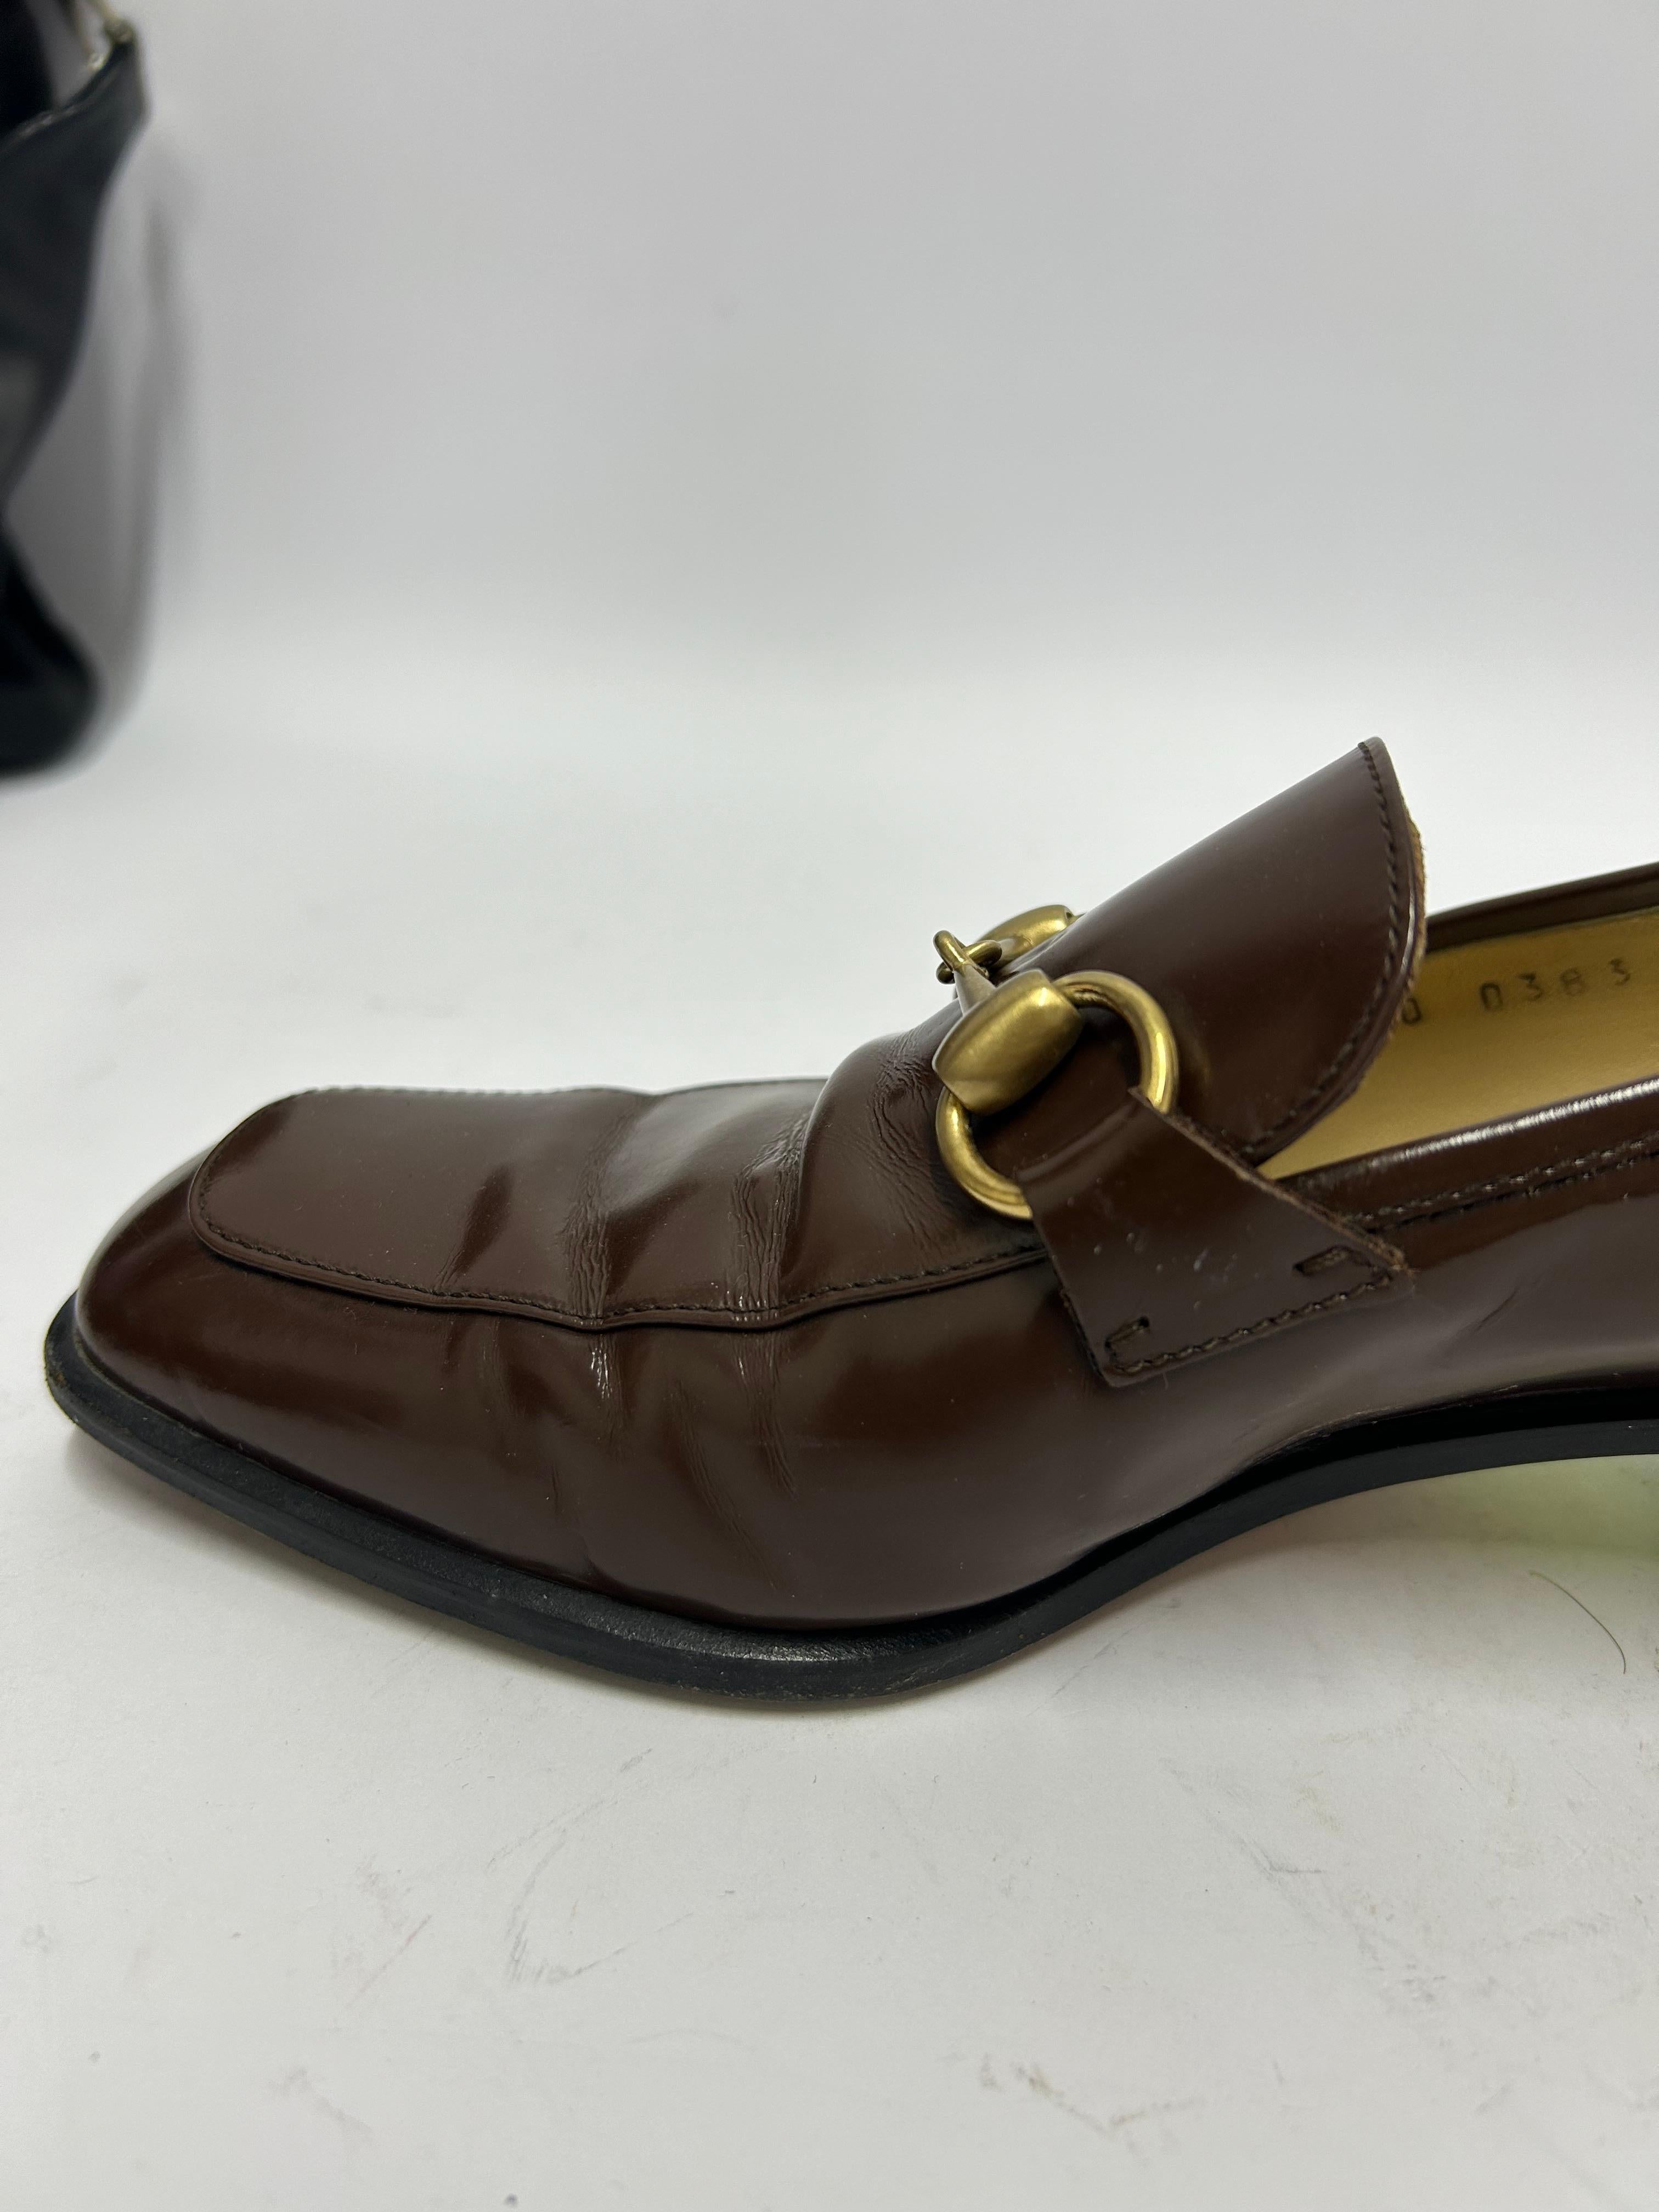 Gucci Horsebit Leather Loafers Size EU 36.5 For Sale 12